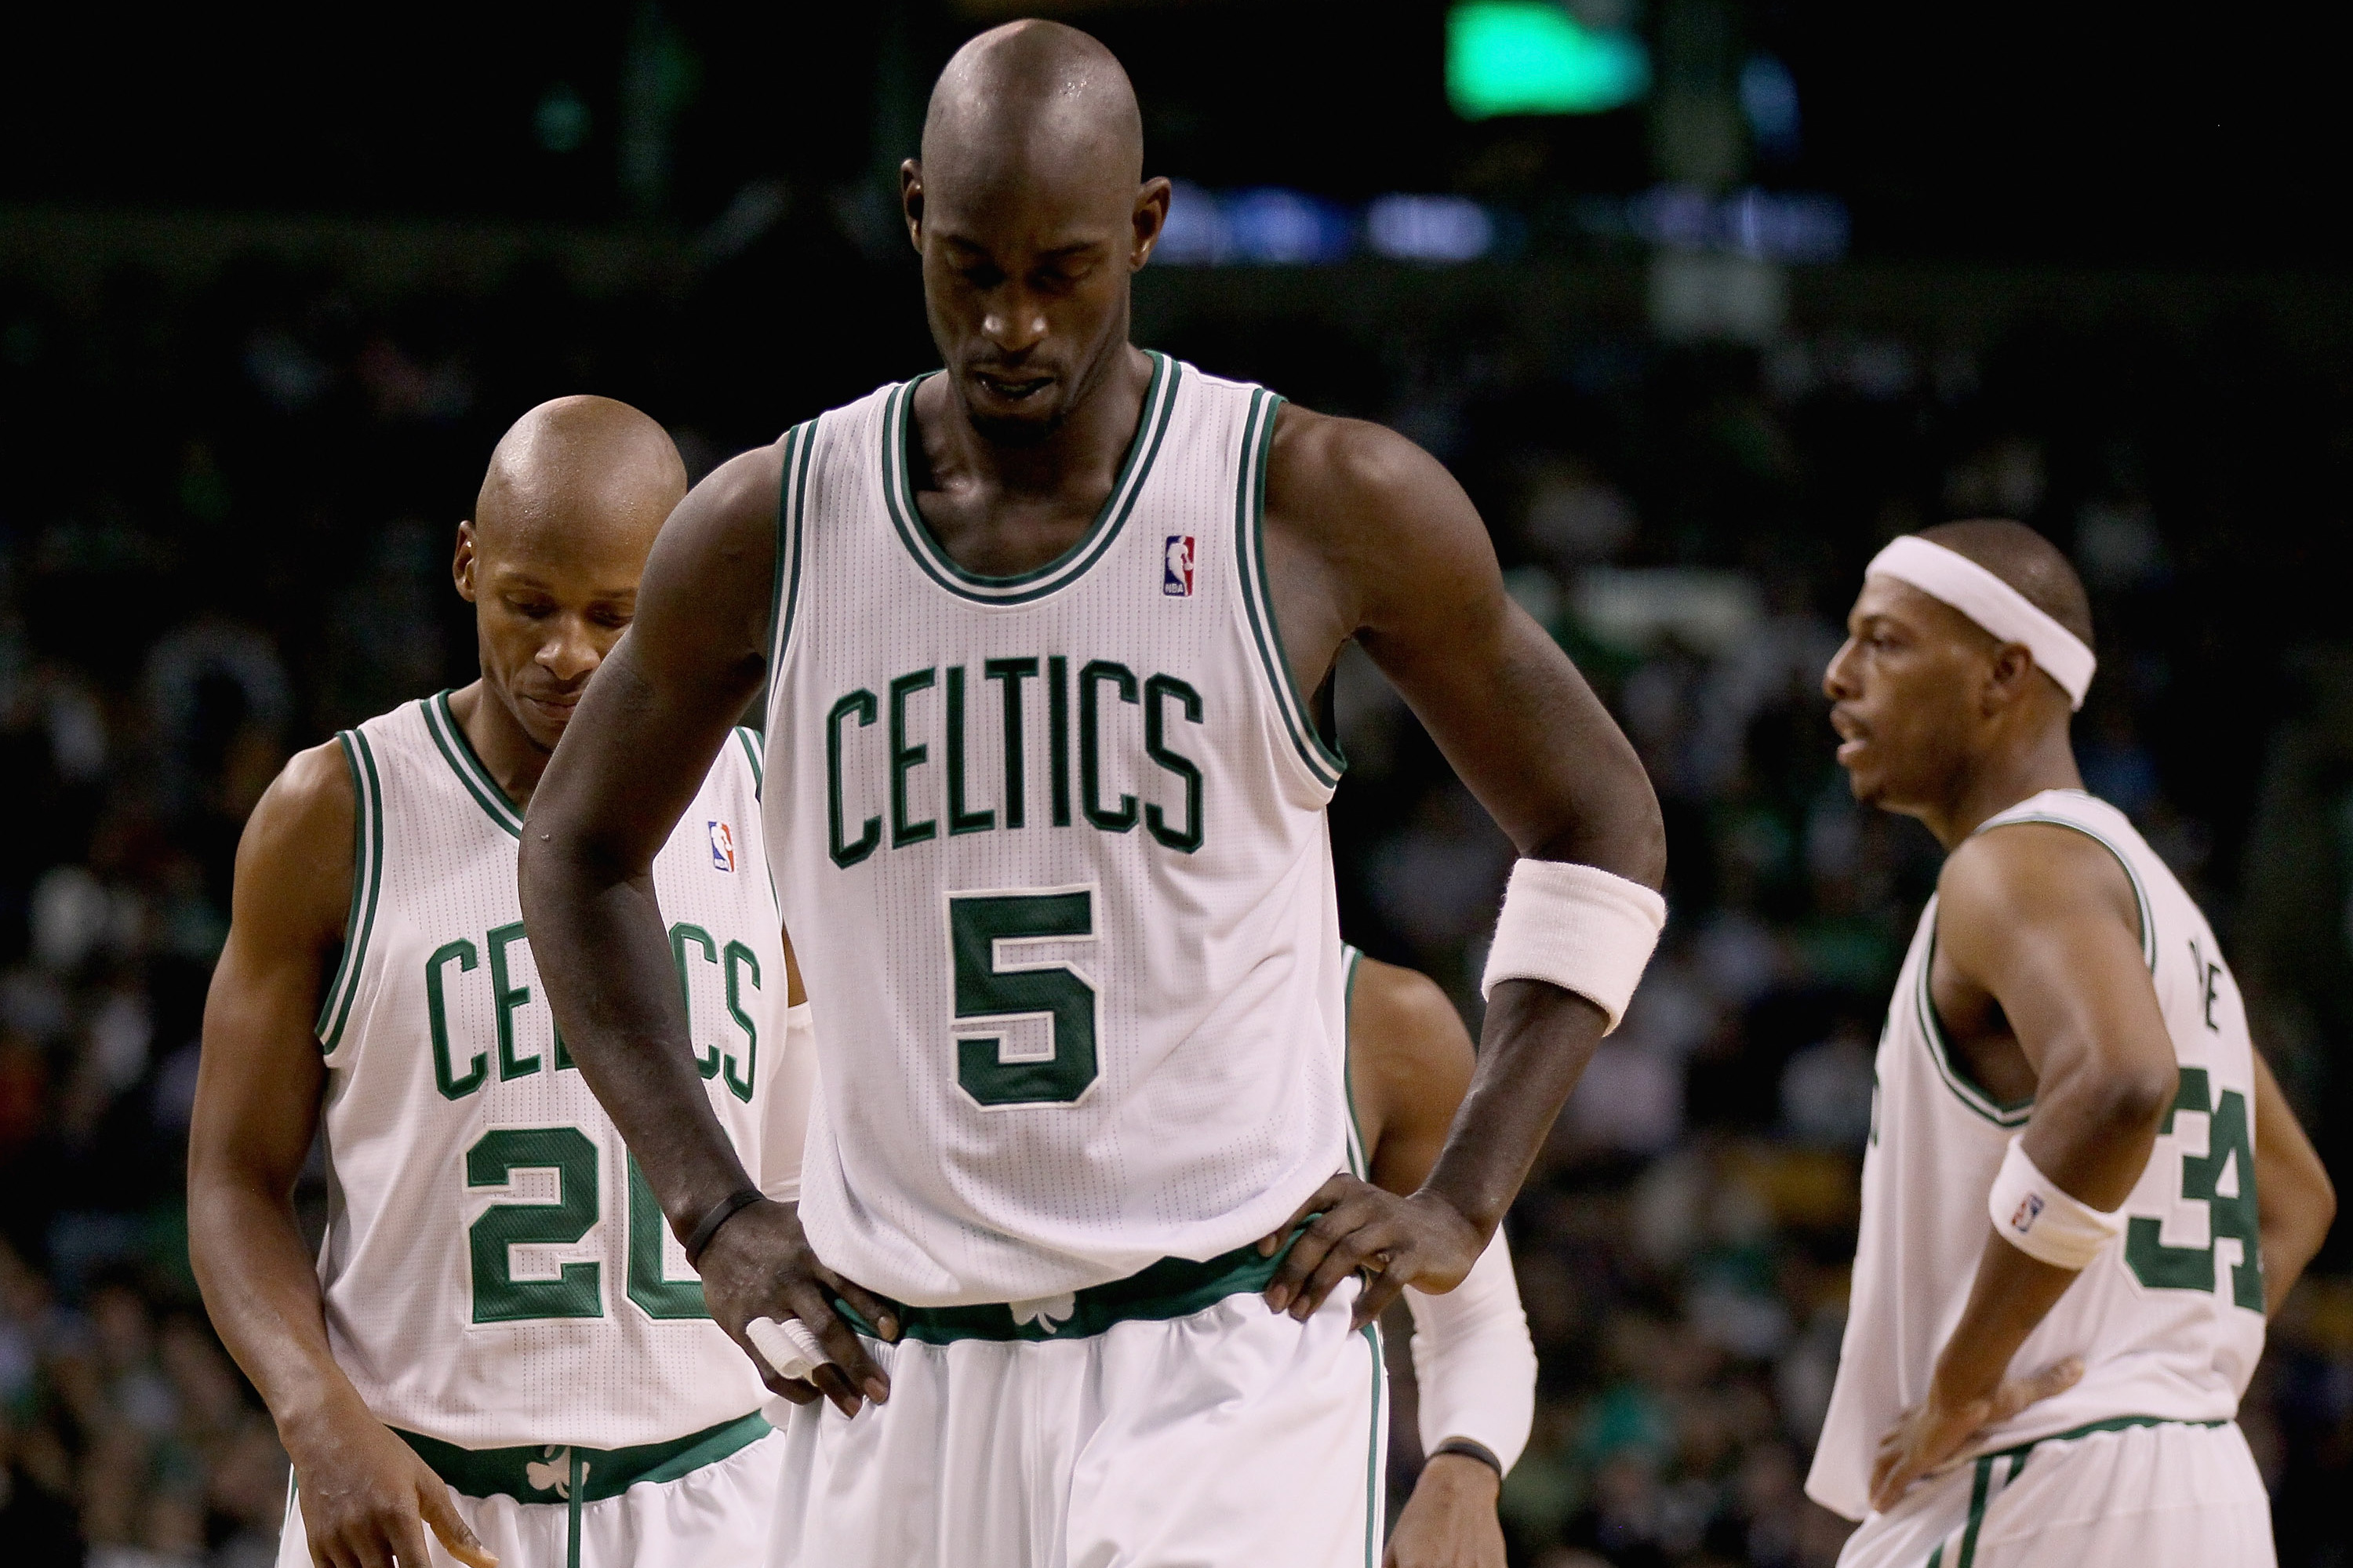 Kevin Garnett is underrated: Here are the stats and facts why